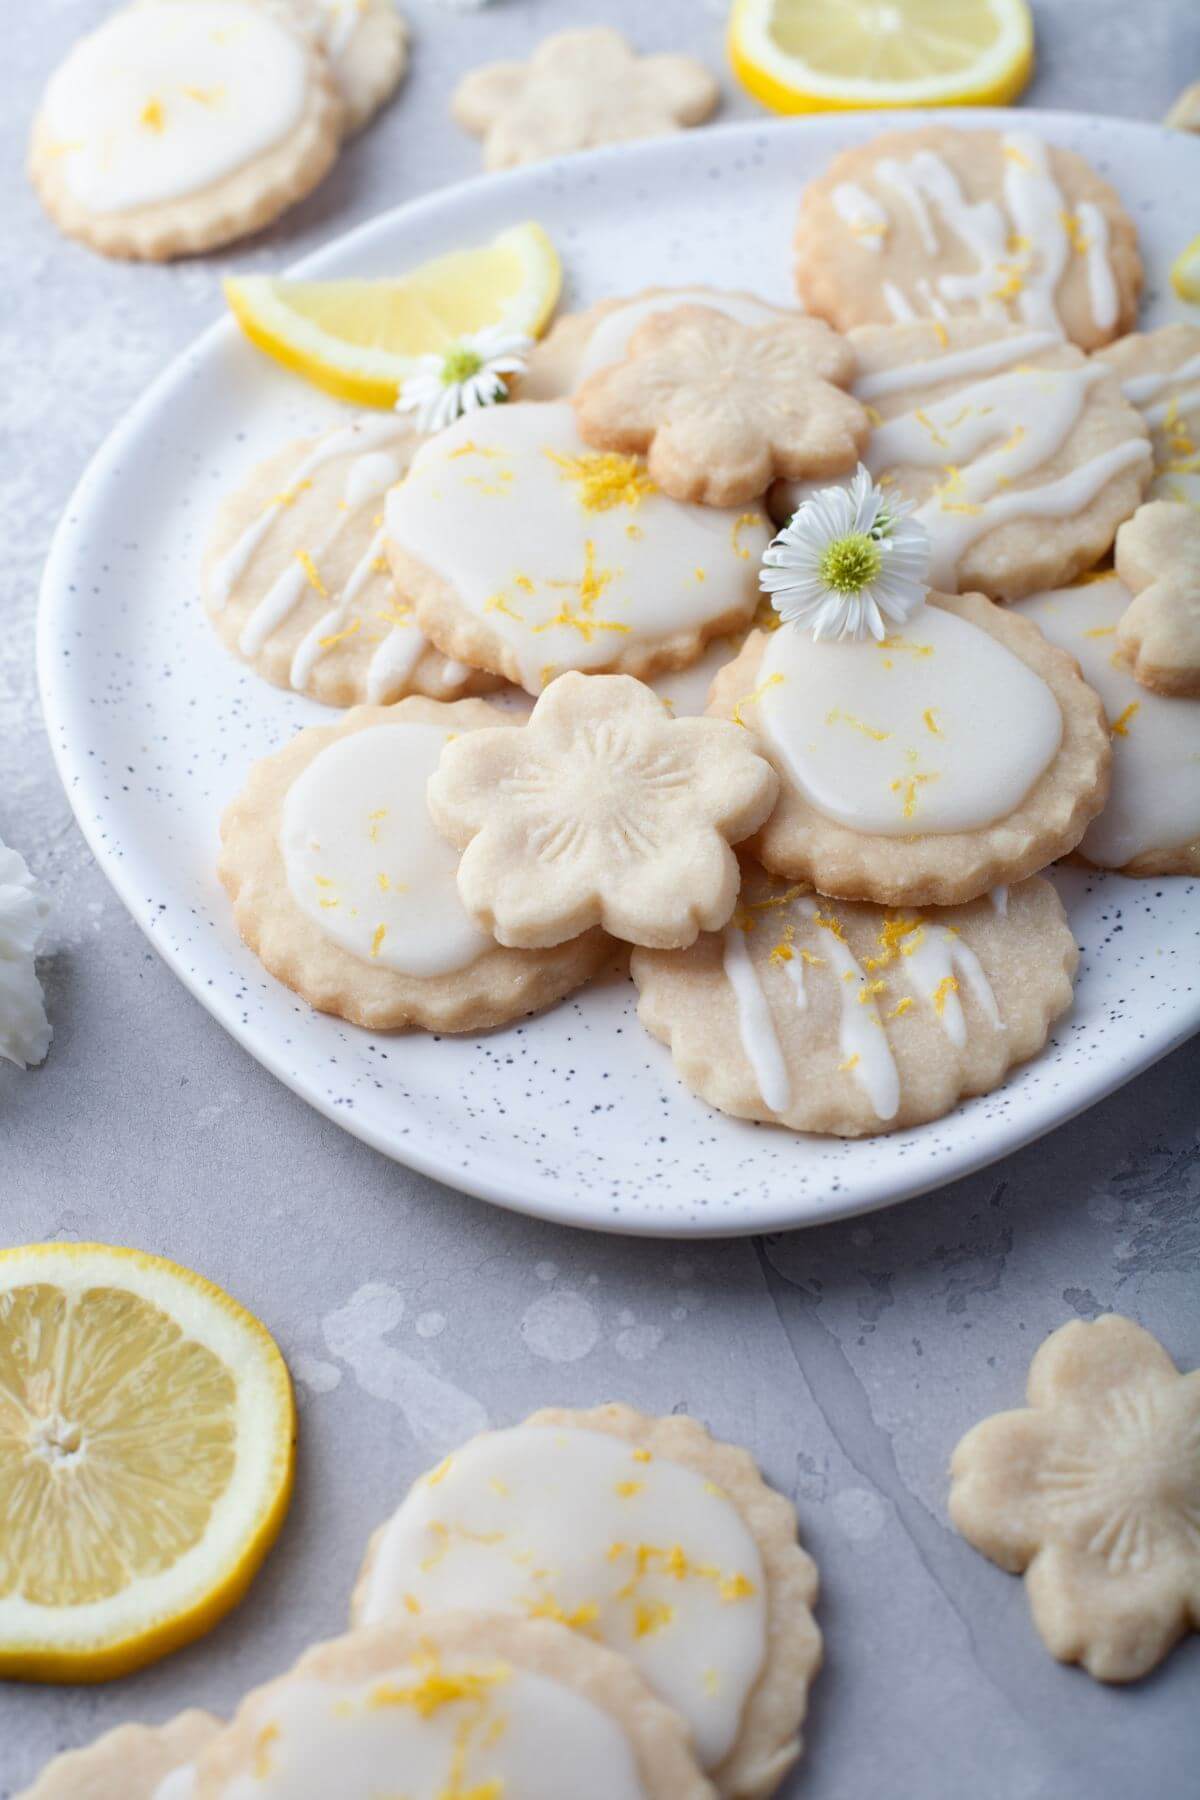 A platter of cookies is garnished with daisies and lemon slices.